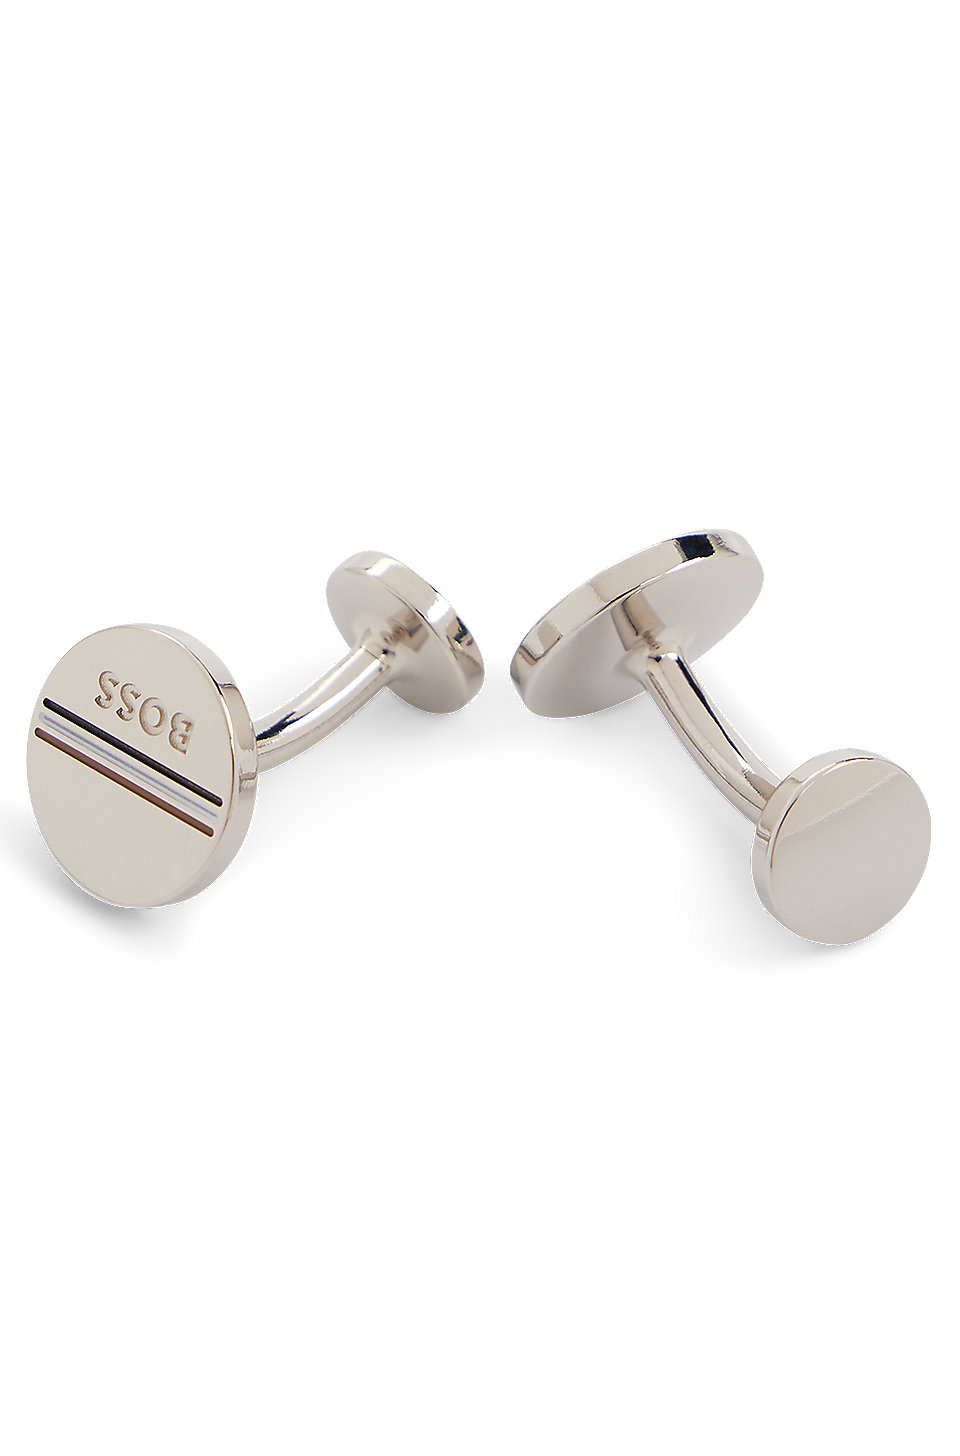 Nageslacht Bachelor opleiding Lief BOSS - Round cufflinks with signature stripe and logo